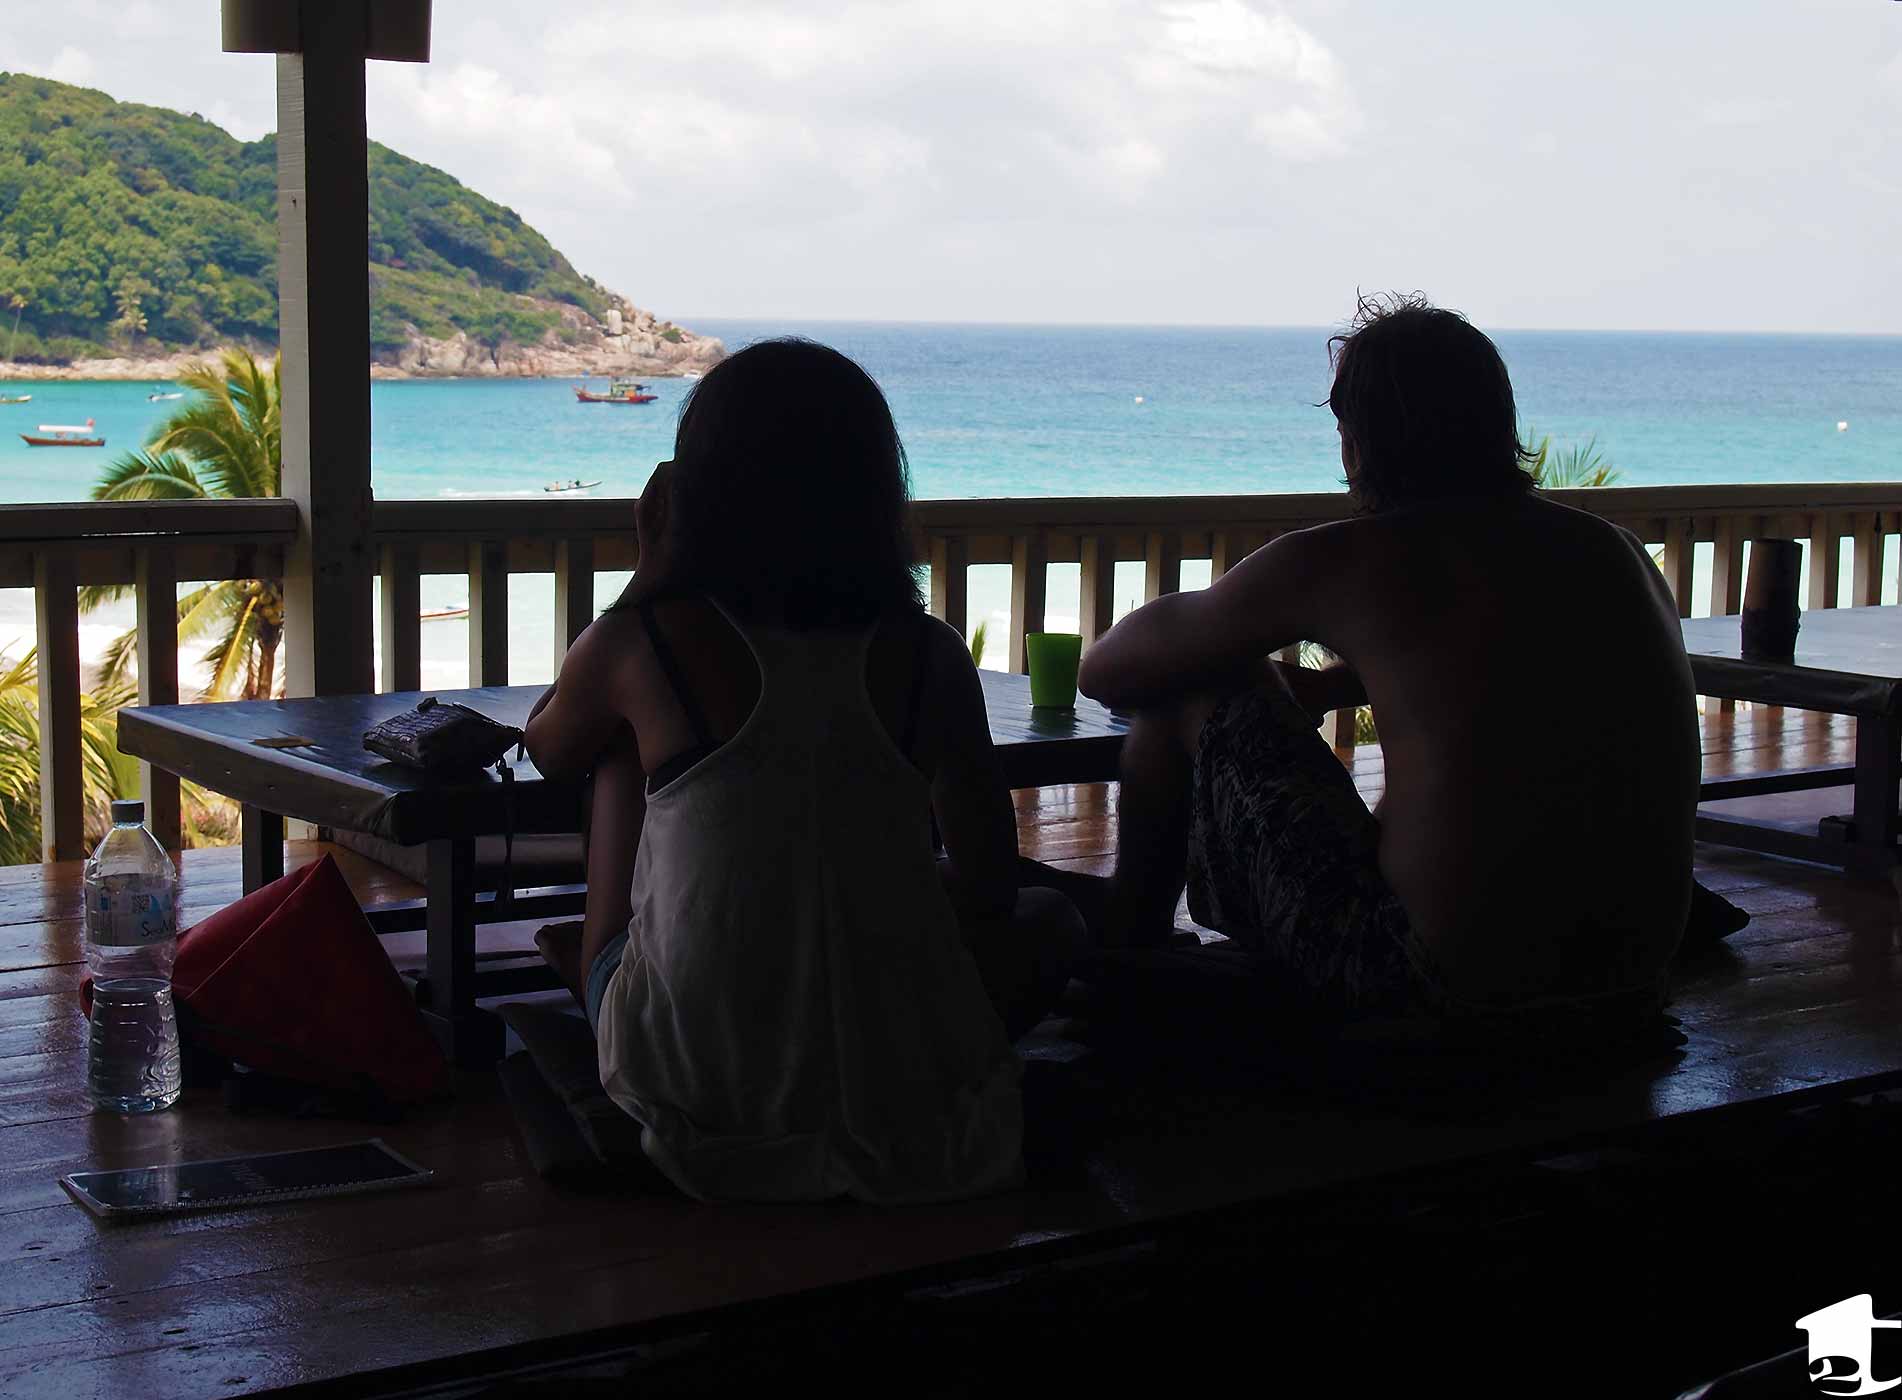 Looking out at Perhentian Kecil